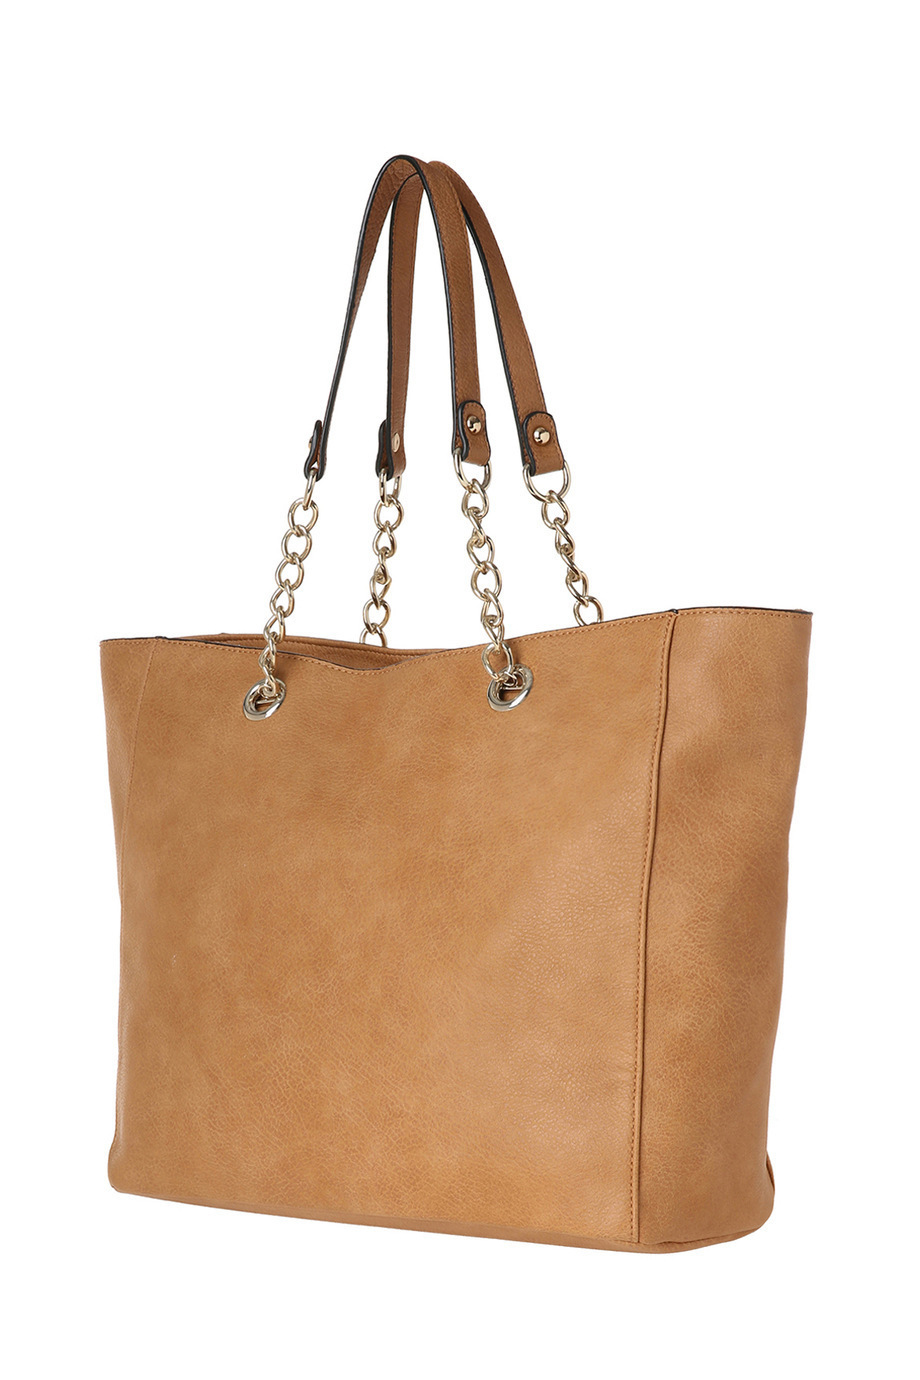 Bags On Sale: Bags On Sale At Myer